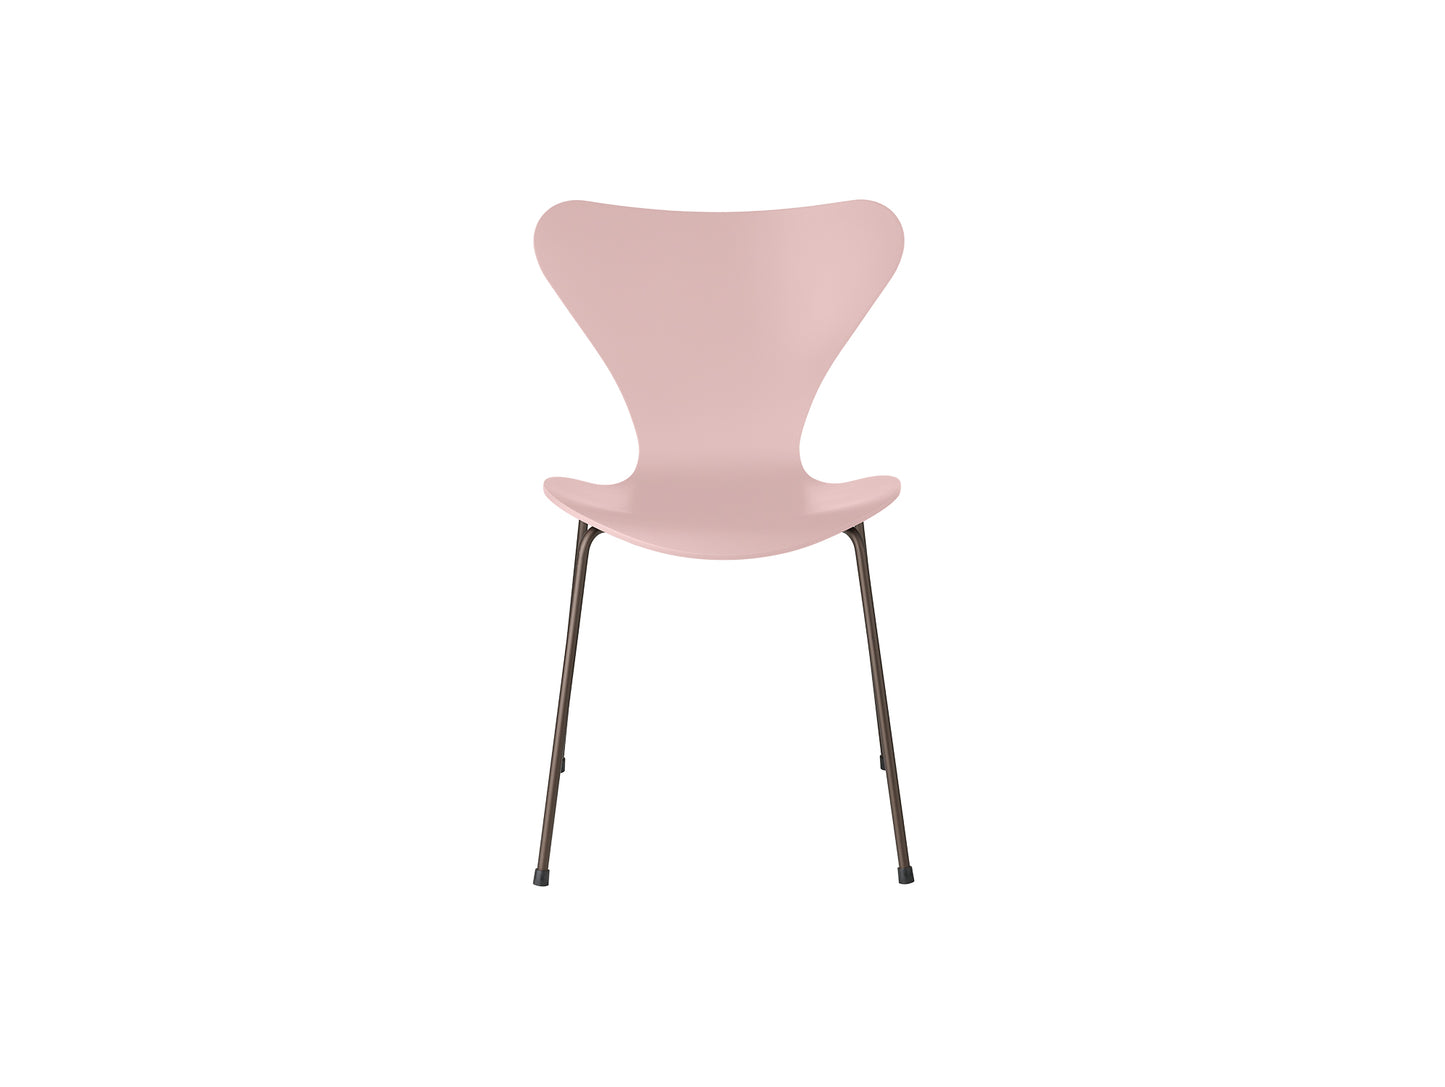 Series 7™ 3107 Dining Chair by Fritz Hansen - Pale Rose Lacquered Veneer Shell / Brown Bronze Steel